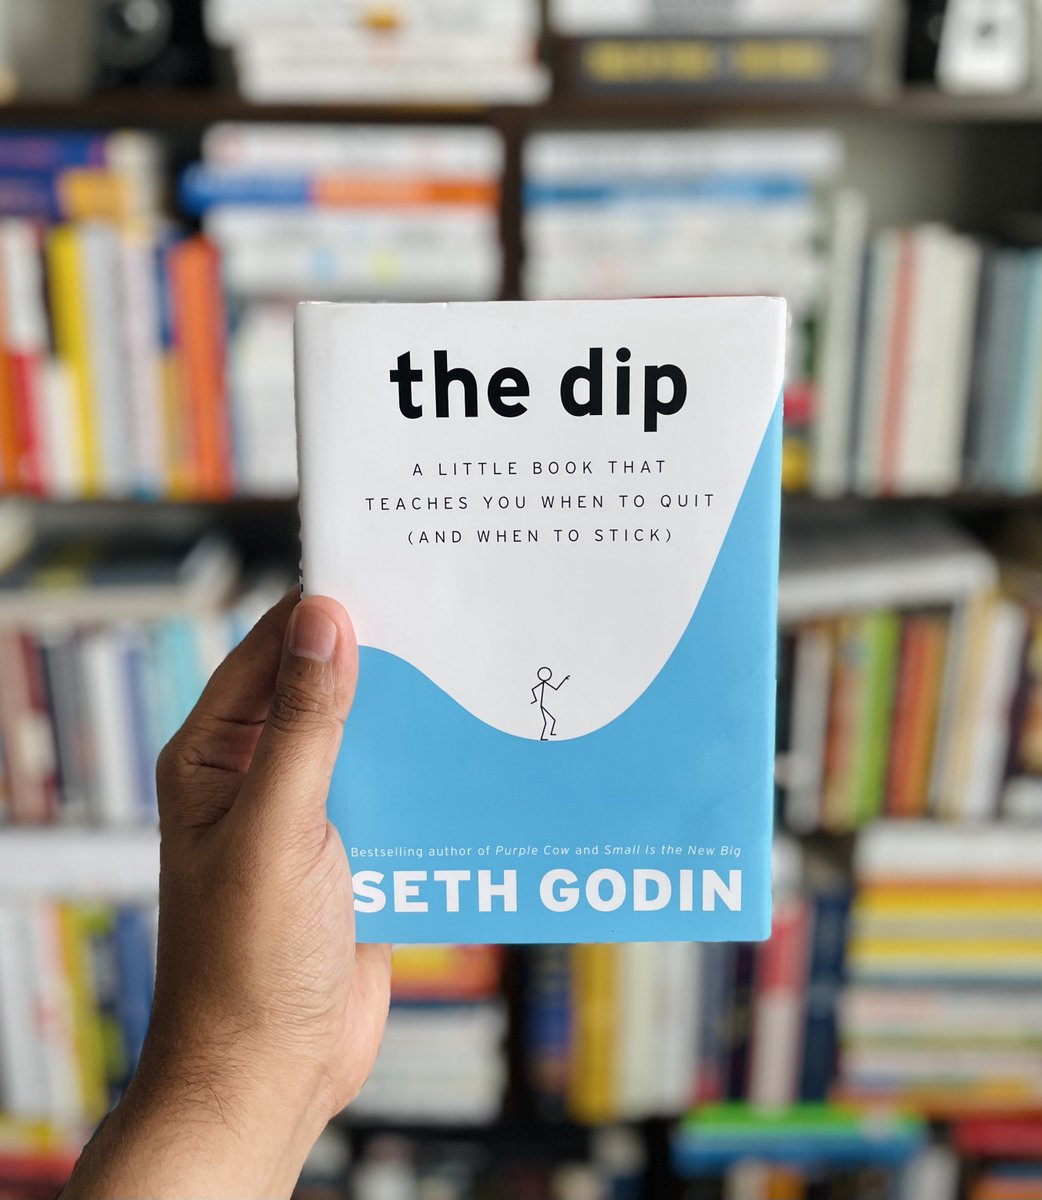 “The Dip by Seth Godin” Brilliant, succinct and very useful read. It provides an interesting perspective on how to determine when to quit and when to keep going to be the best in the world. 10 lessons from the book 🧵